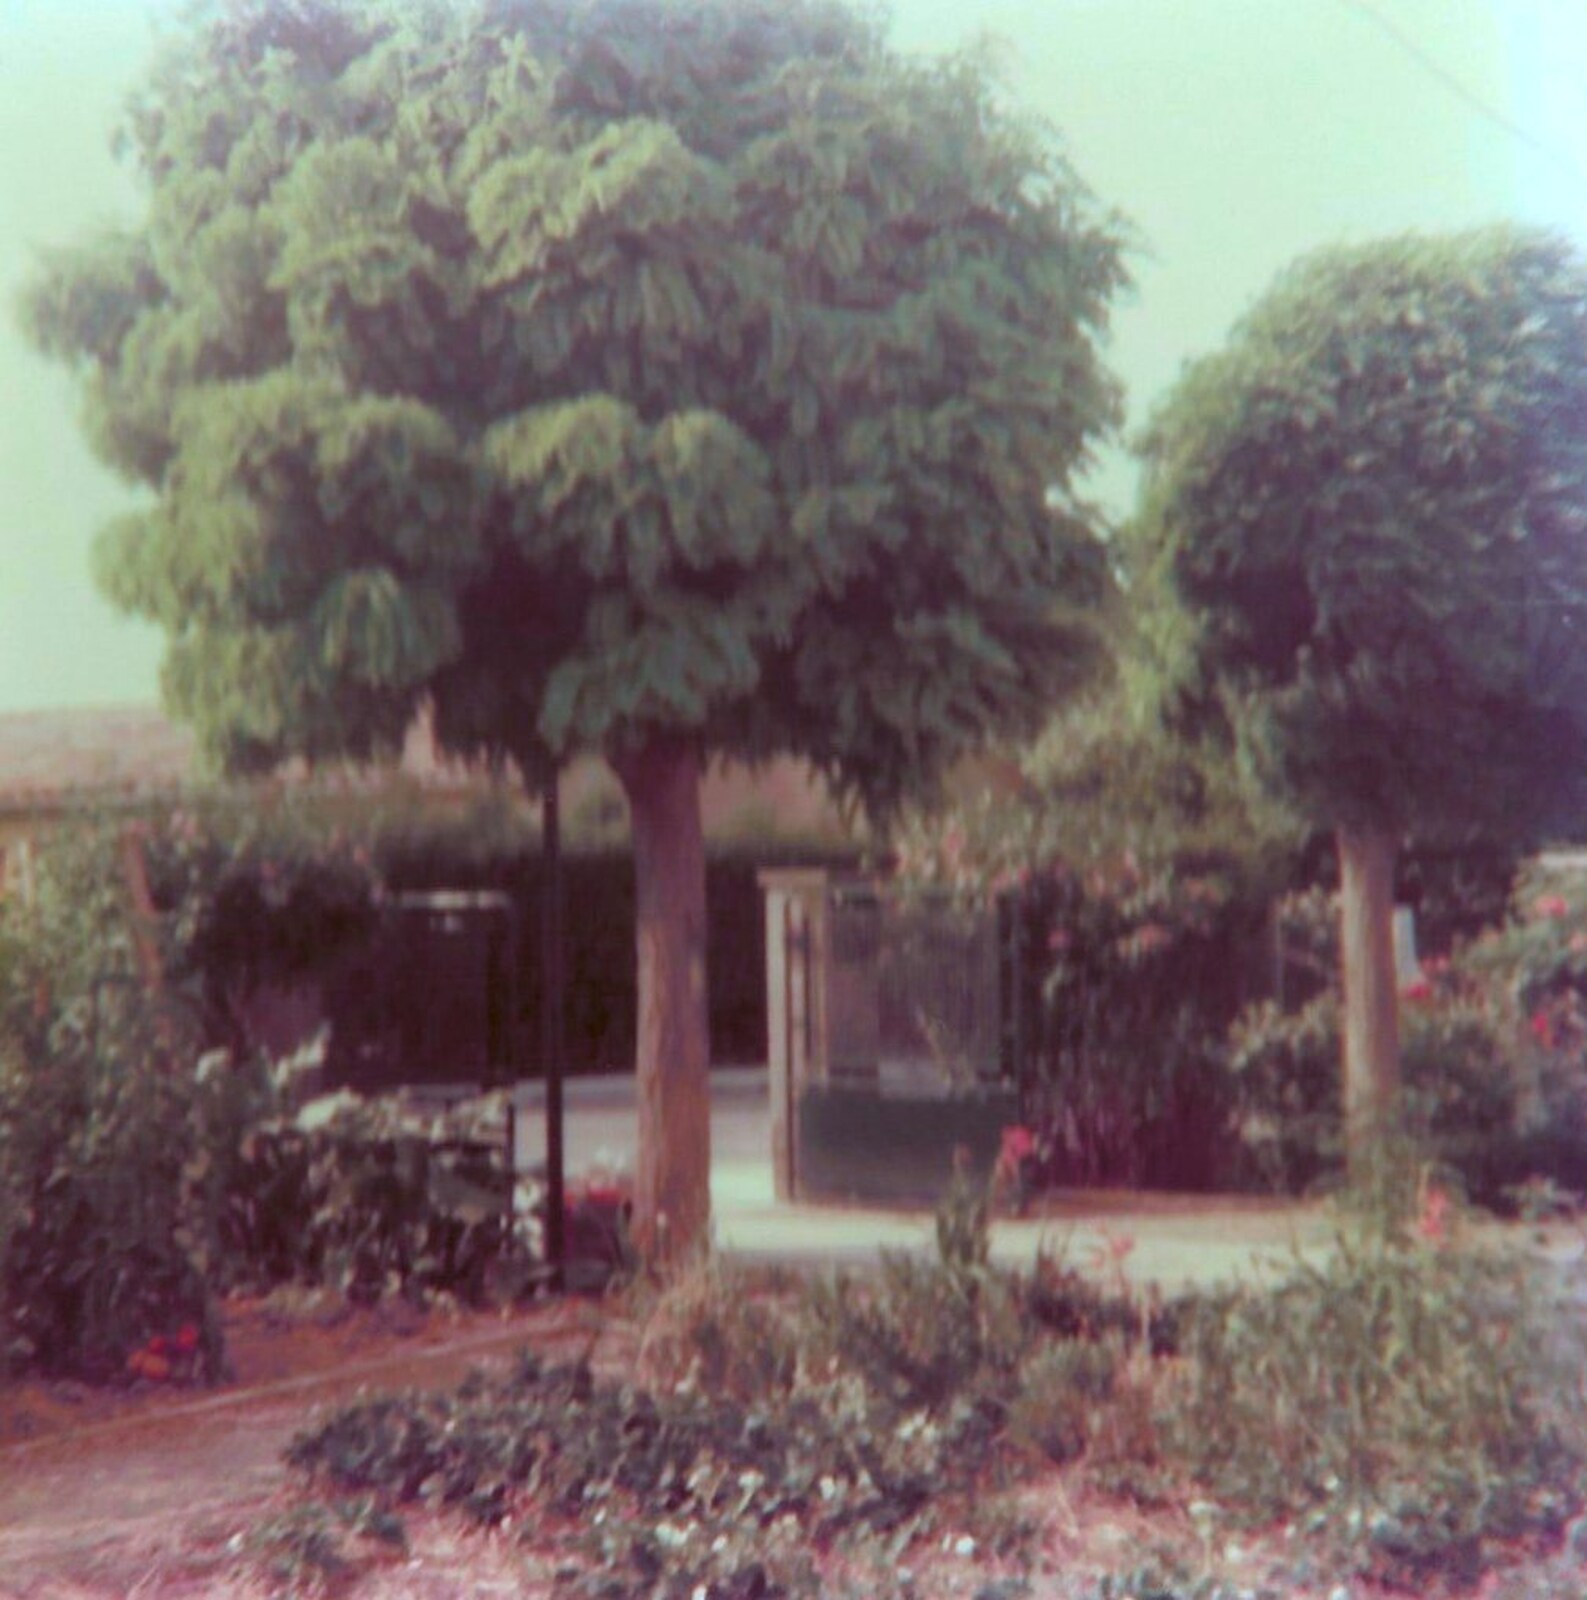 Claudine's front garden from A Trip to Bram, Aude, France - 25th July 1980